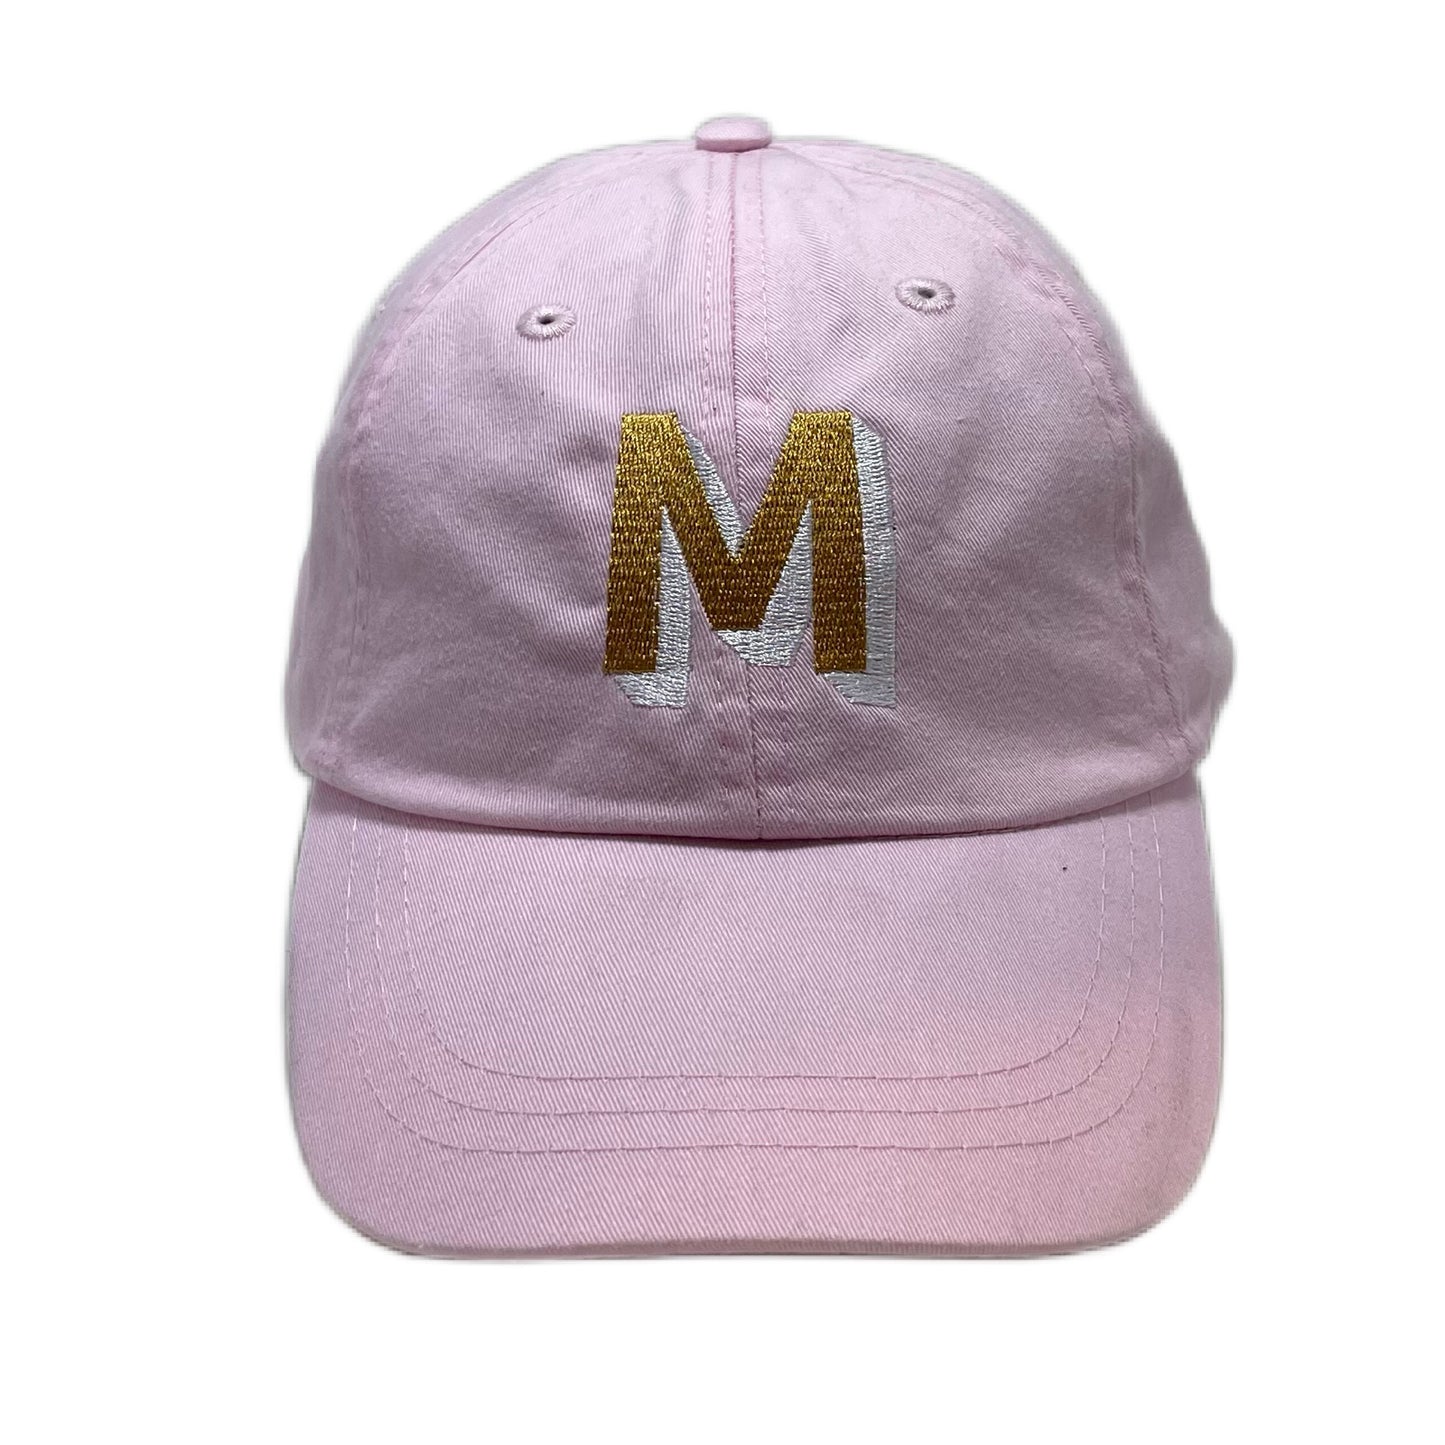 Customizable White Dad Hat with Navy Blue and Green Shadow Block Font